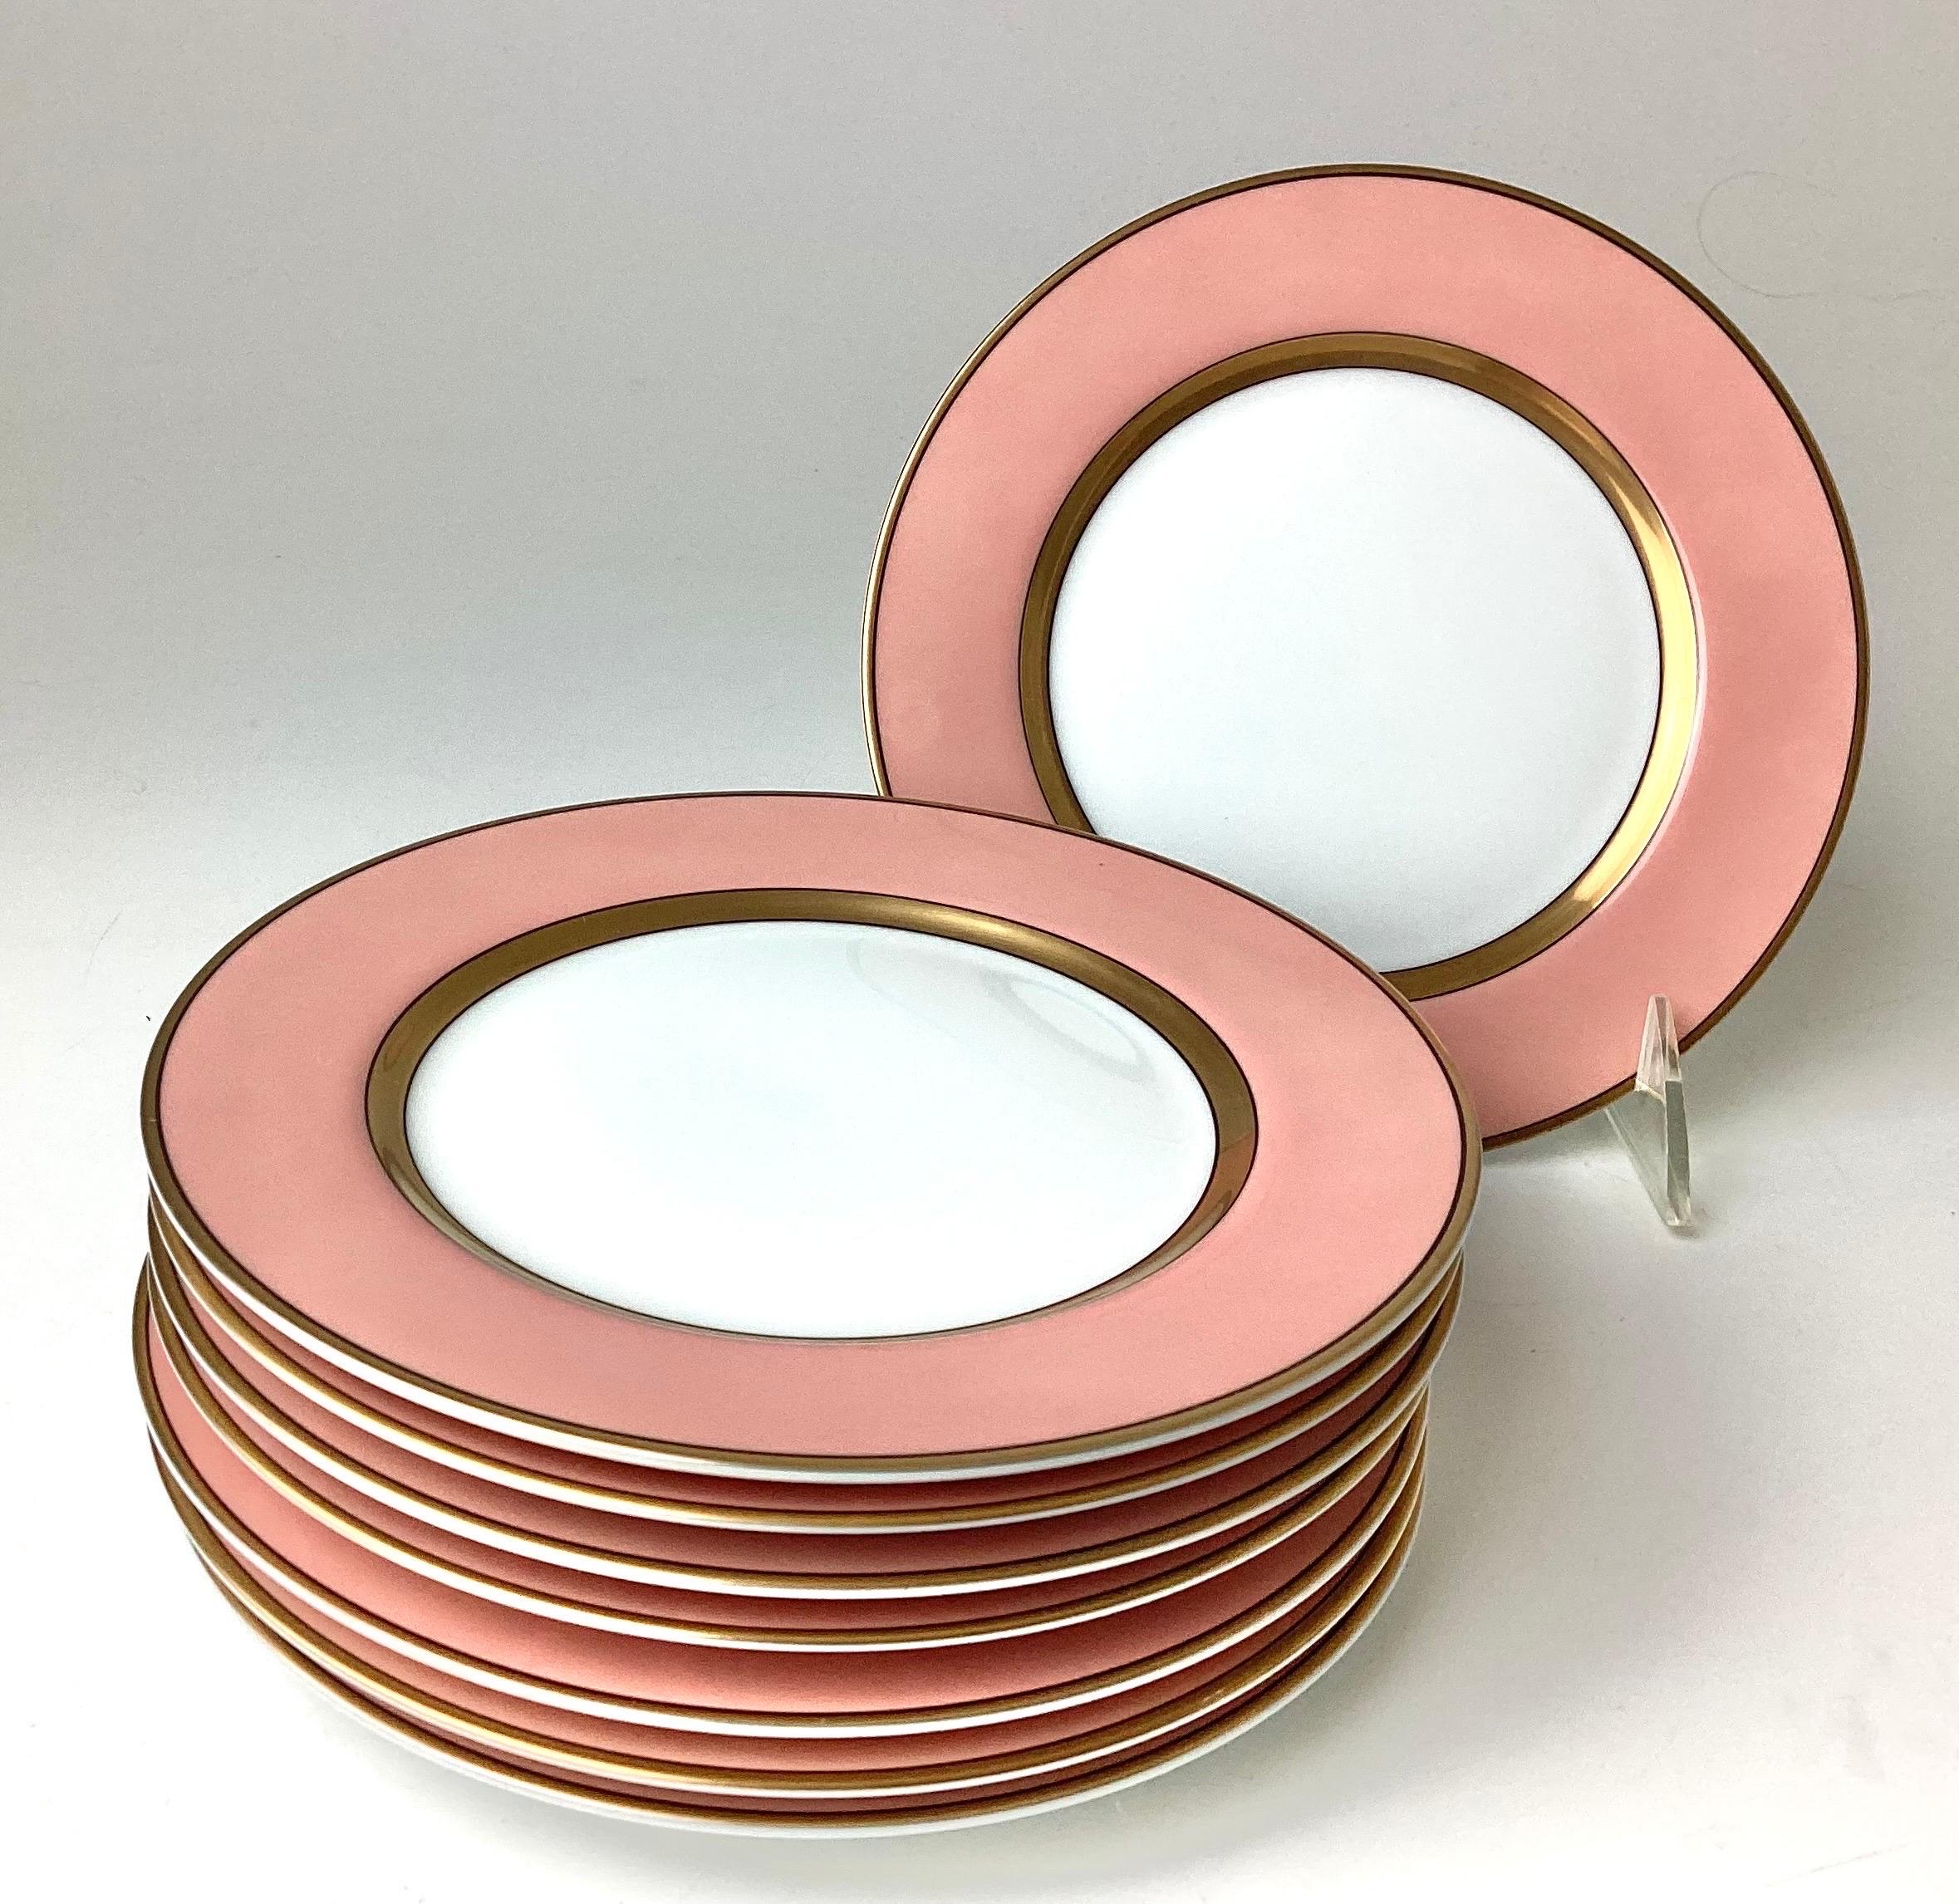 Fitz and Floyd bread & butter plates renaissance peach w/ wide gold verge line set of 8. All in great condition.